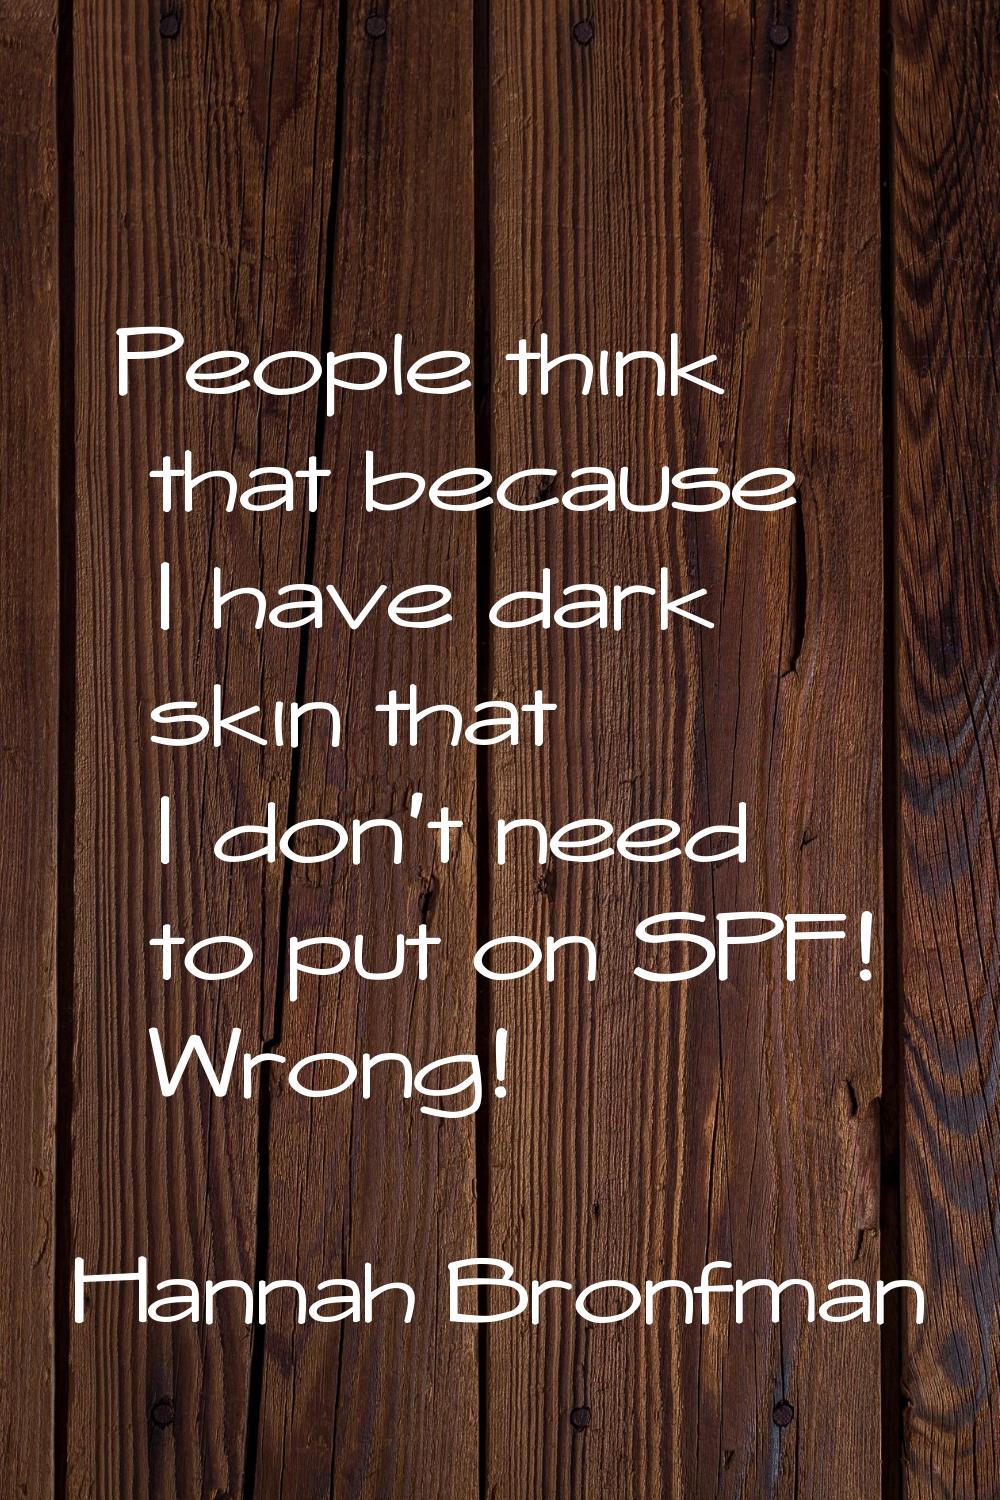 People think that because I have dark skin that I don't need to put on SPF! Wrong!